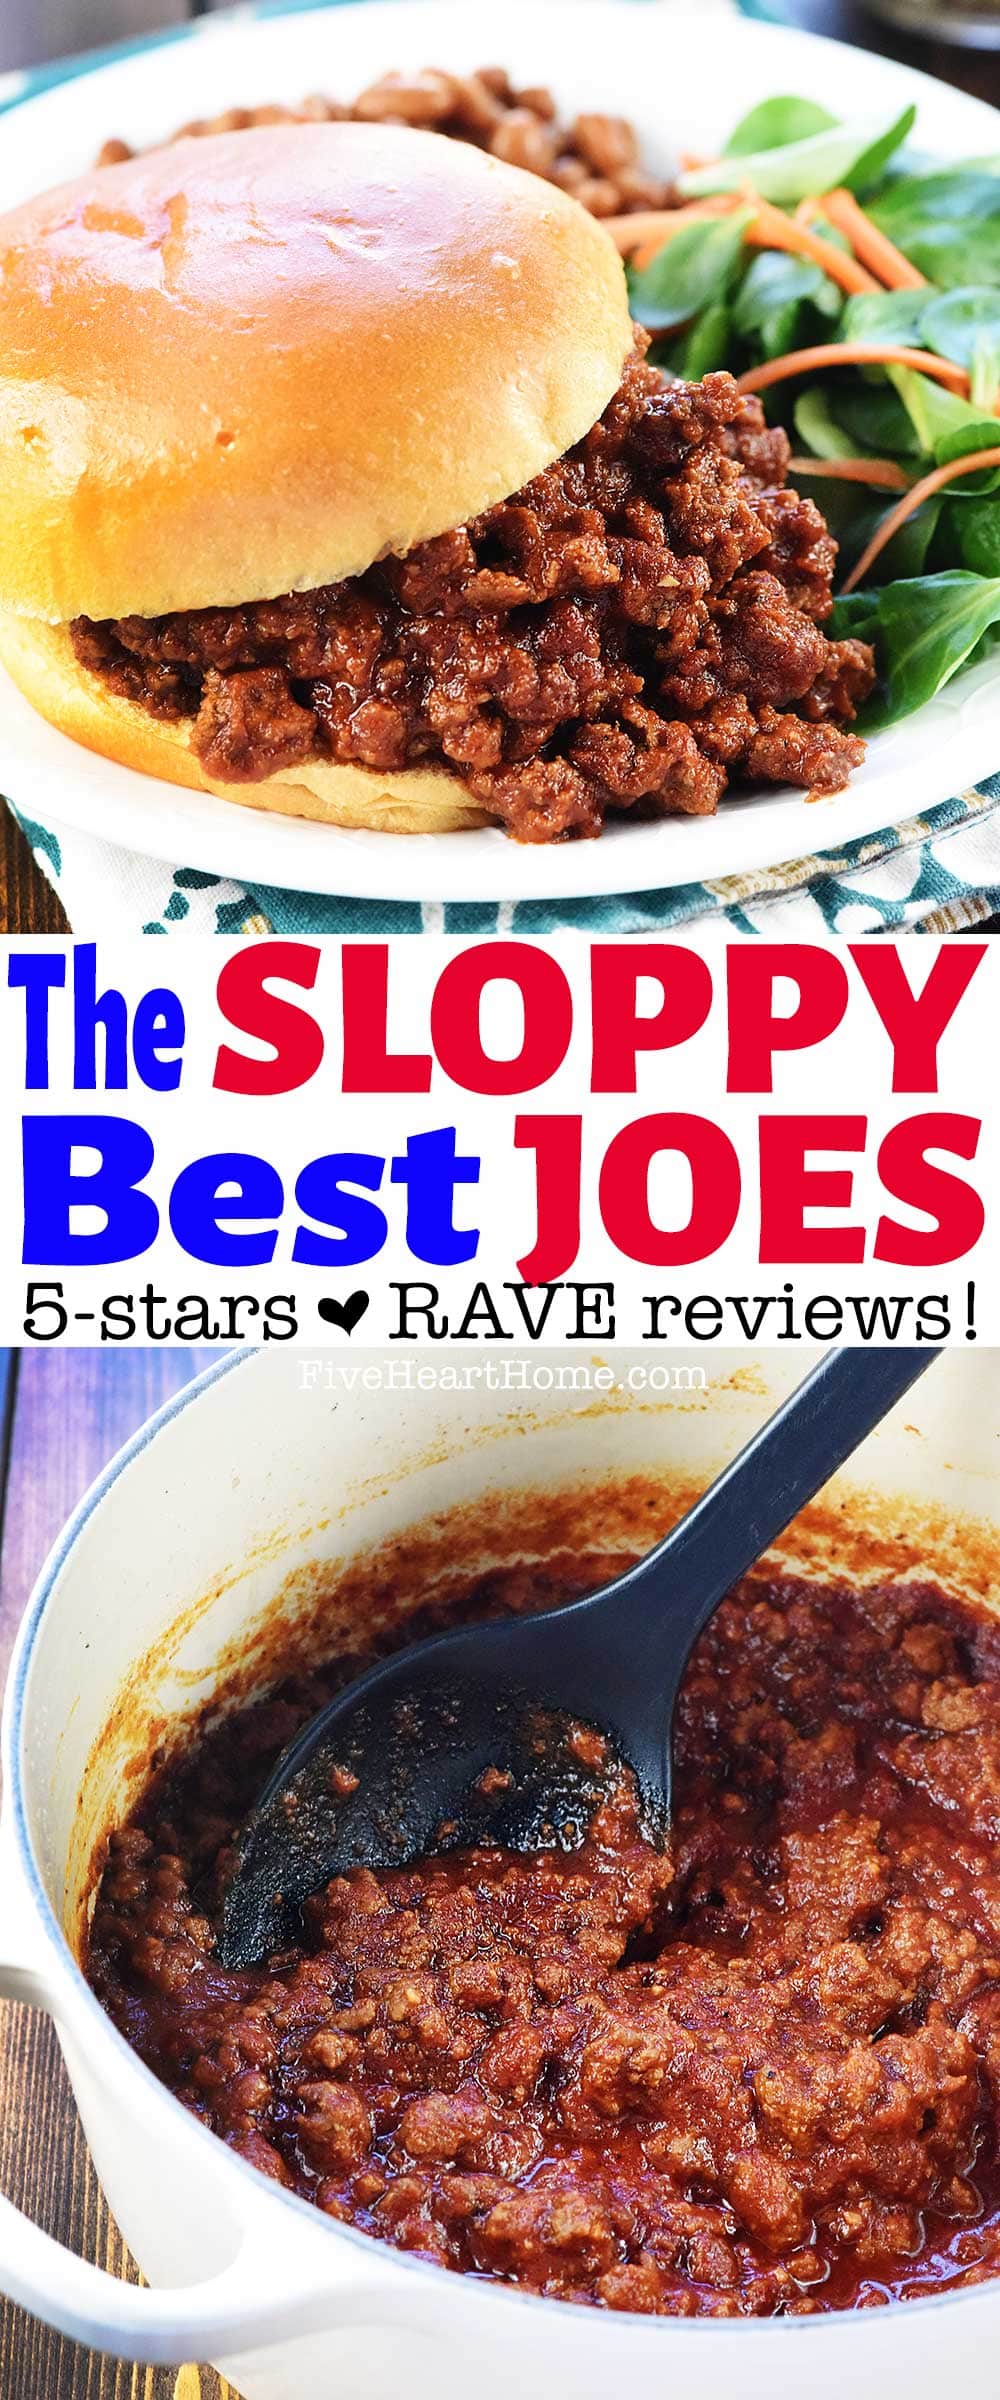 The VERY BEST Sloppy Joe recipe ~ delicious, quick, and easy to make. An amazing homemade sloppy joe sauce made withh real ingredients puts it over the top. Hundreds of rave reviews agree that these Homemade Sloppy Joes are fantastic! | FiveHeartHome.com via @fivehearthome